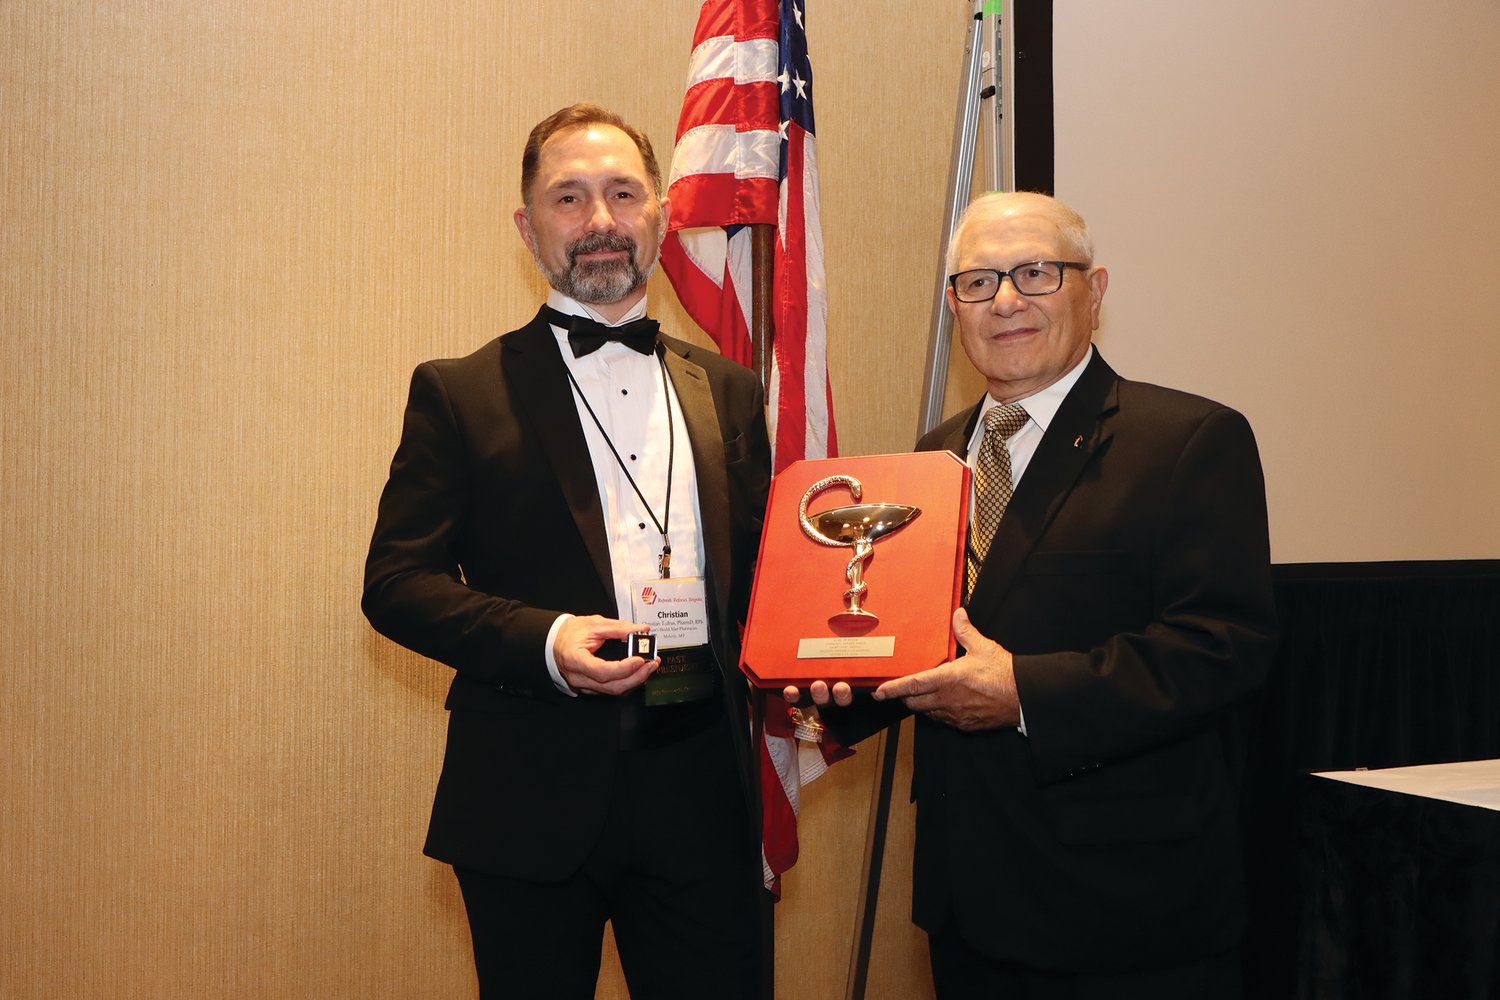 Sam Tadrus, right, is presented the Bowl of Hygeia Award at this year’s Joint MPA & IPhA Annual Conference and Trade Show presented by the Missouri Pharmacy Association.